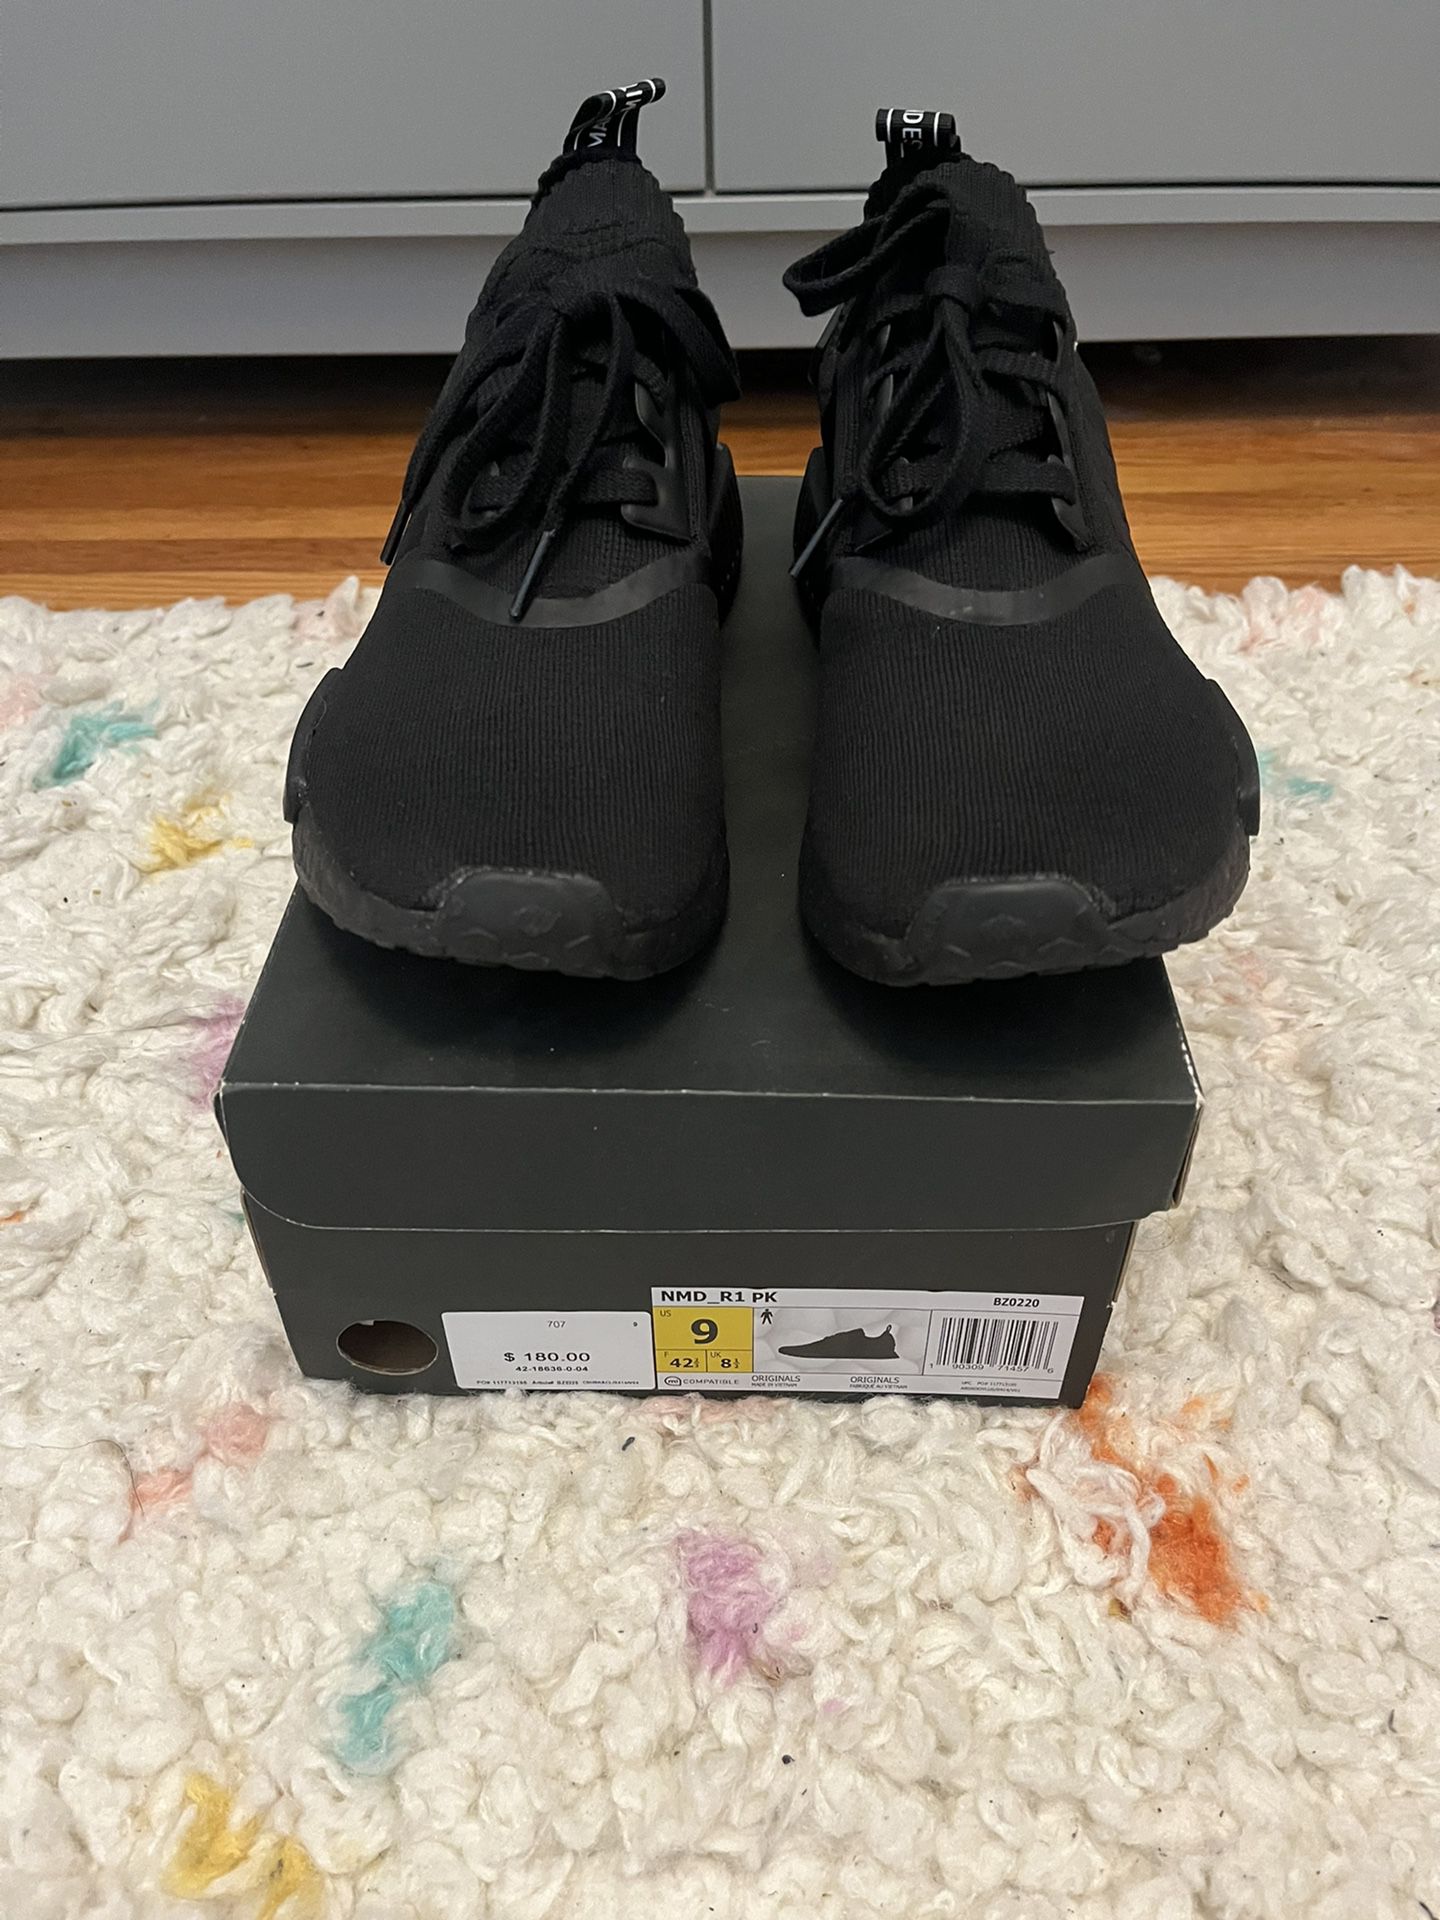 Adidas NMD R1 PK Japan Triple Black 9 for Sale in Diego, - OfferUp